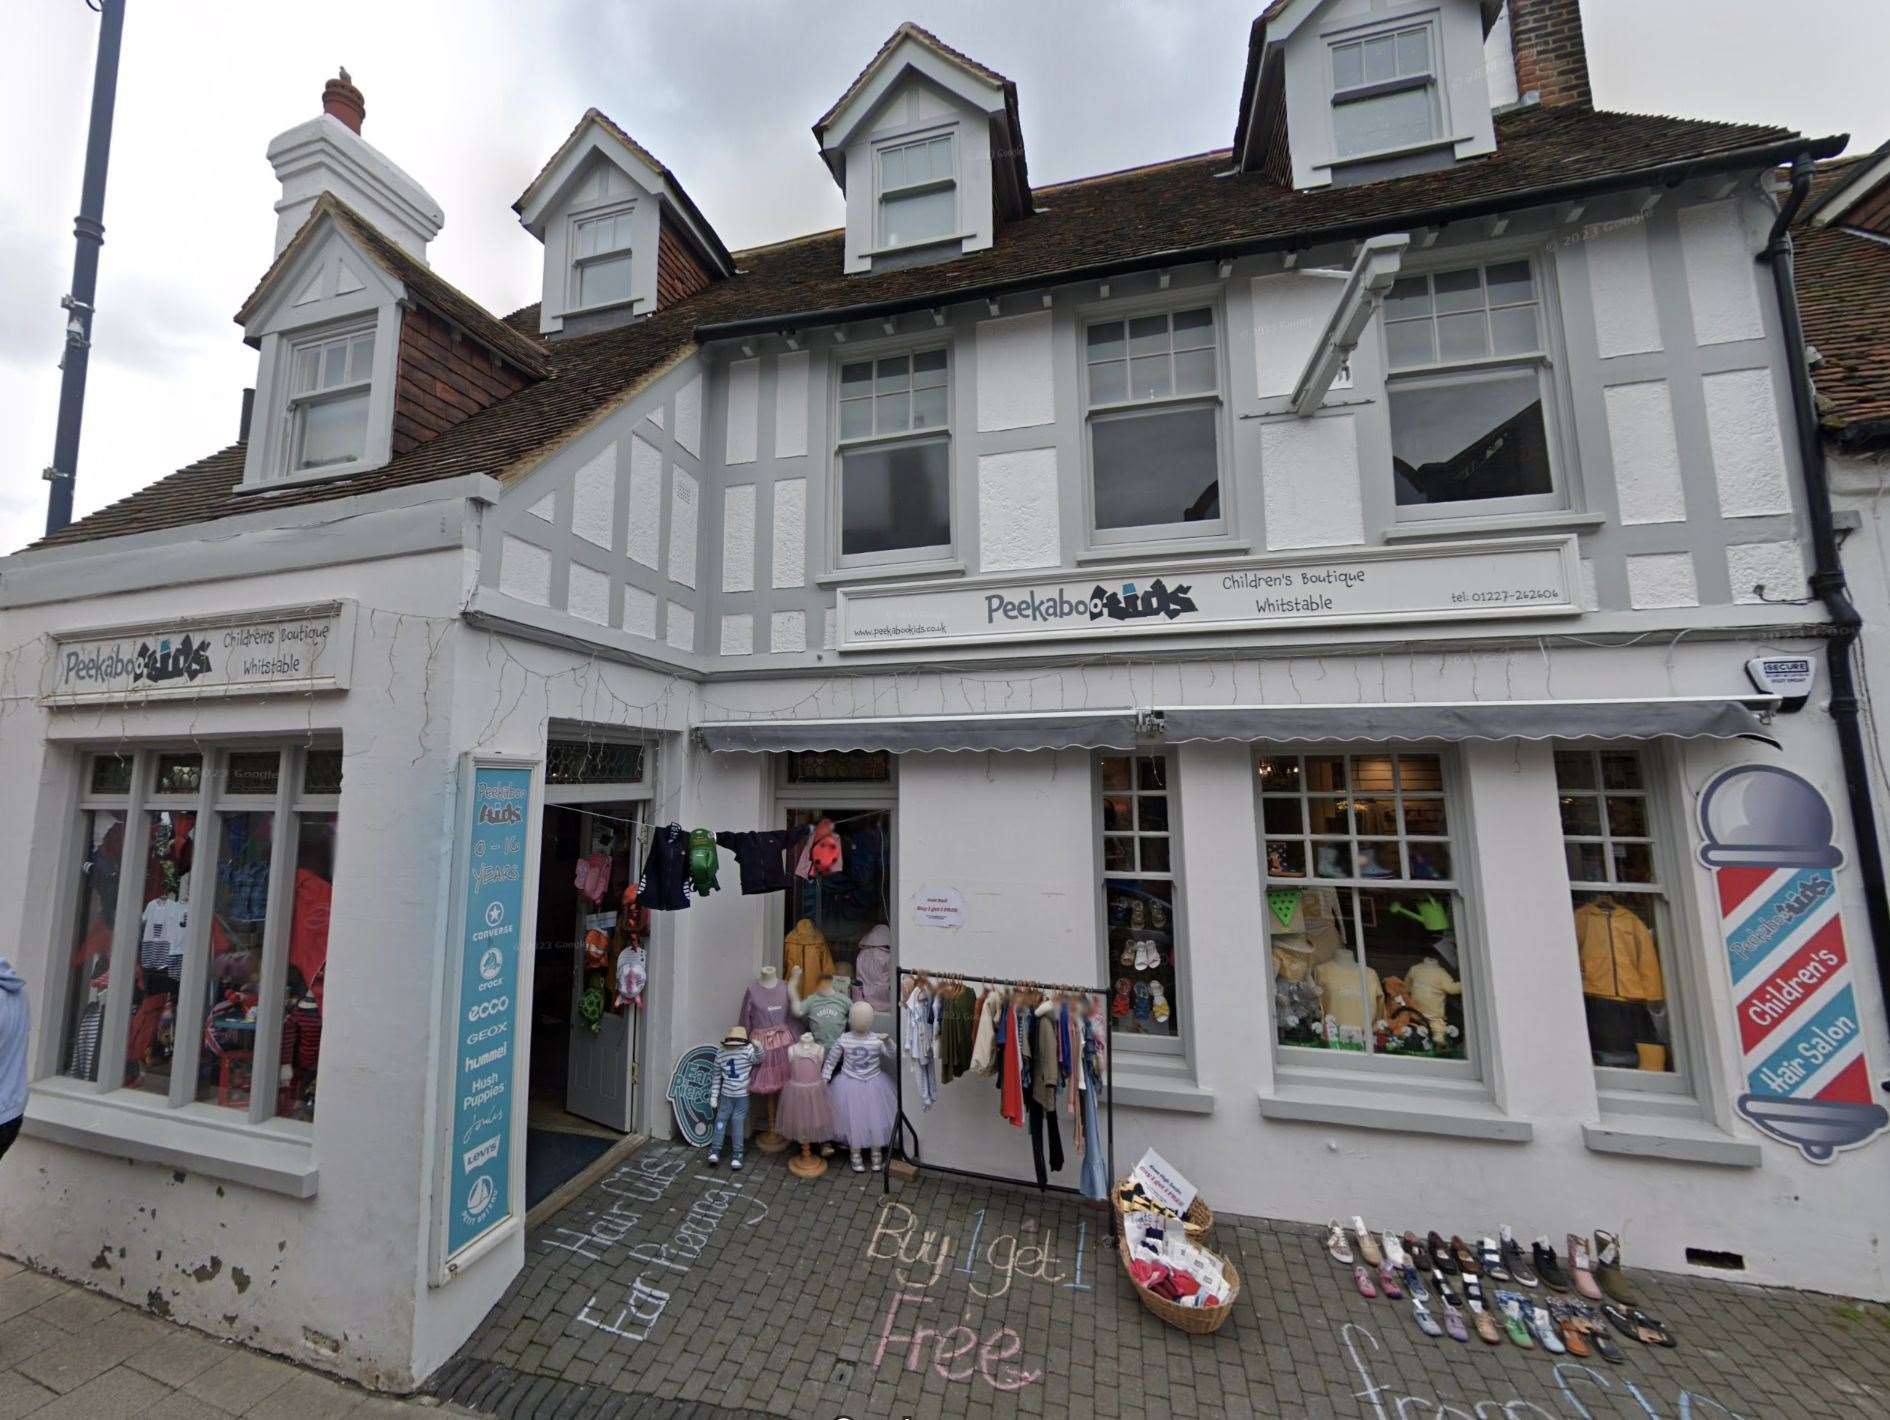 Peekaboo Kids clothing store in Harbour Street, Whitstable, is to make way for the new restaurant